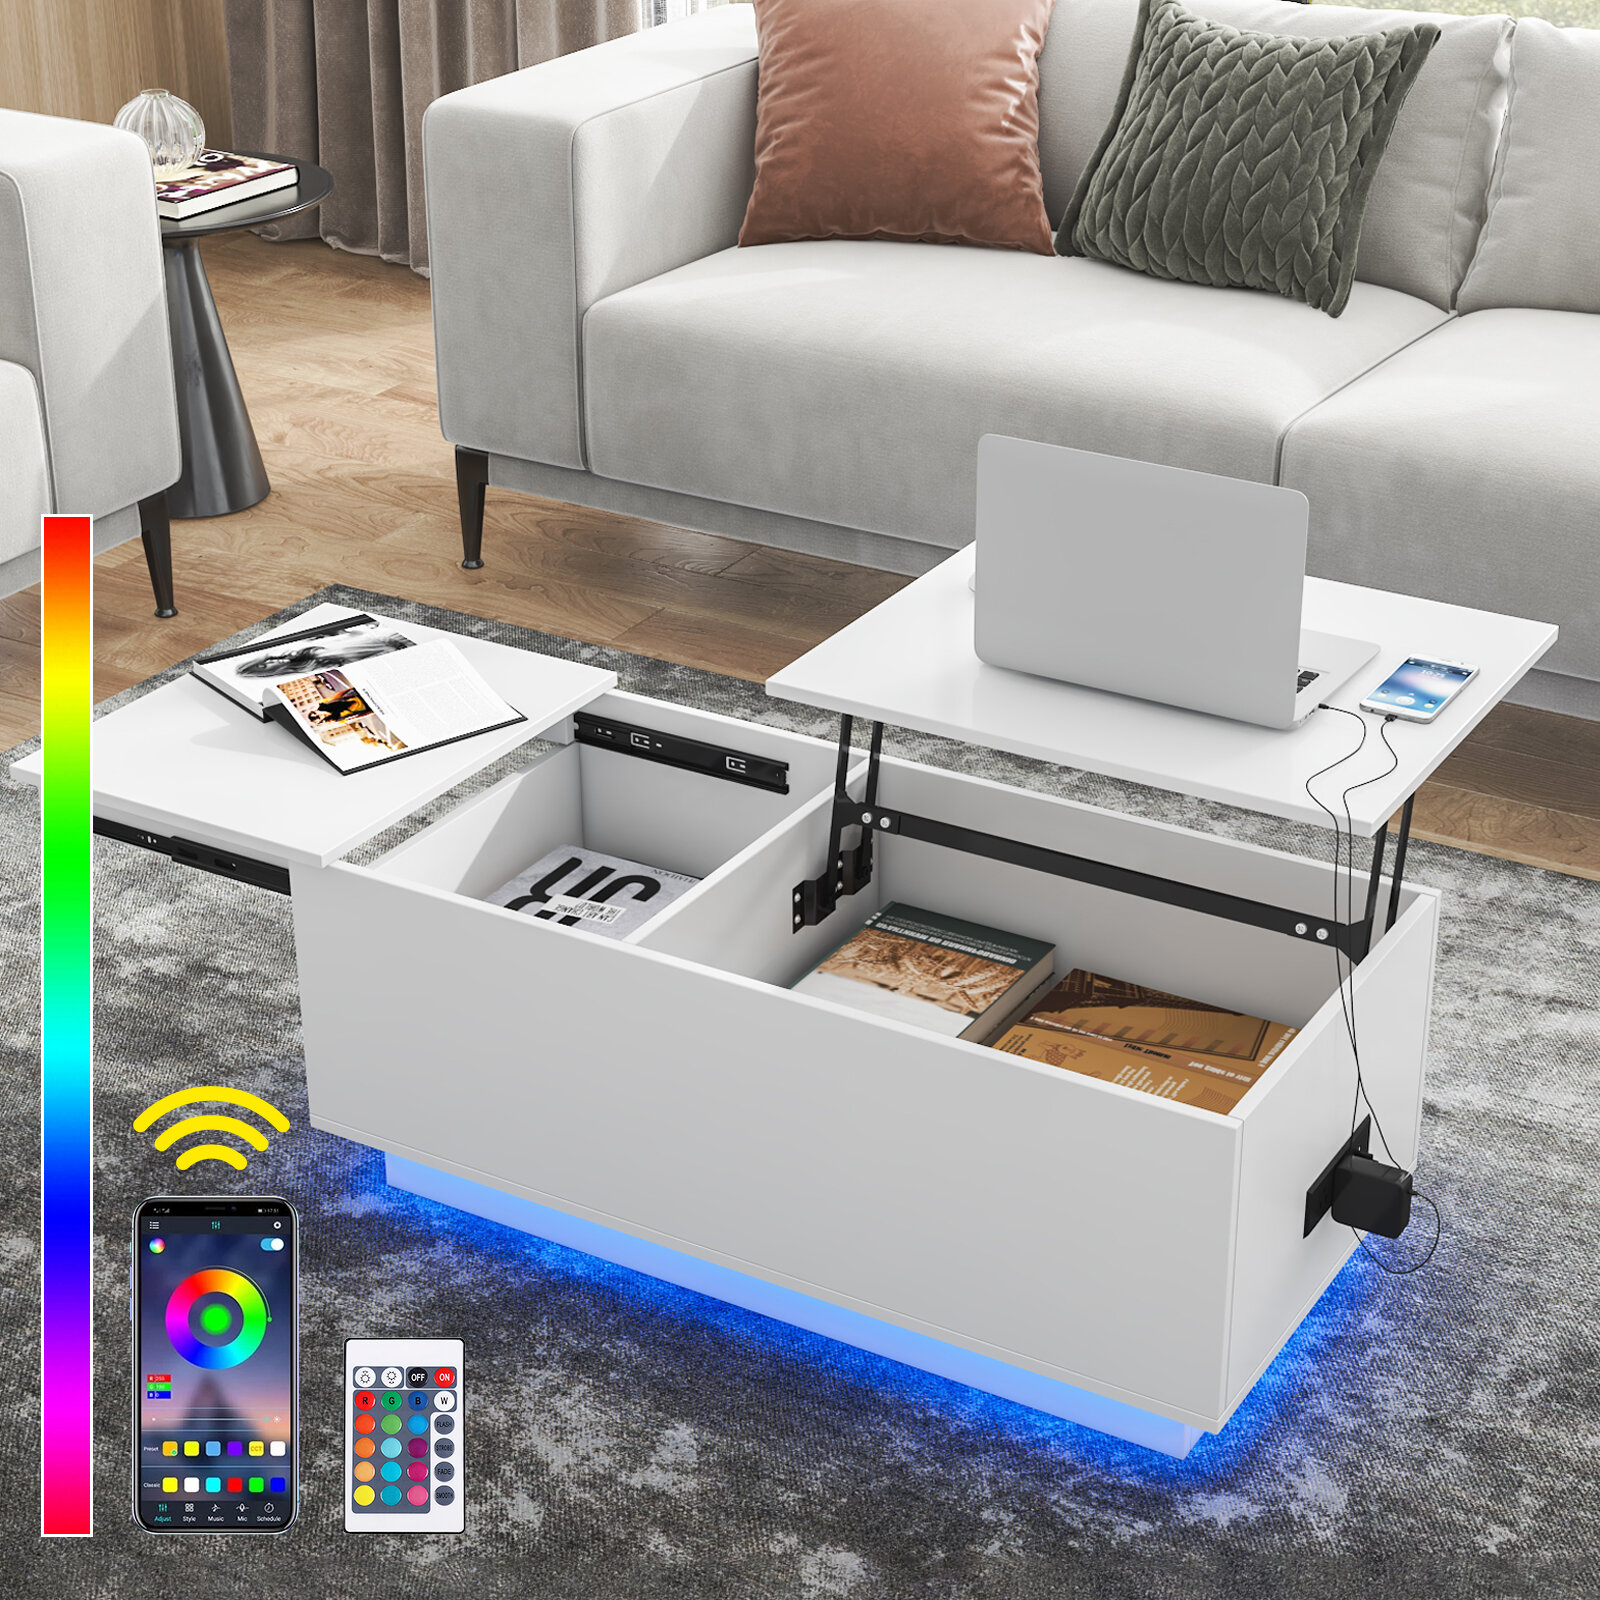 

Hommpa LED Lift Top Coffee Table with Charging Station High Gloss Rectangle Center Tea Desk White Hidden Storage Rising